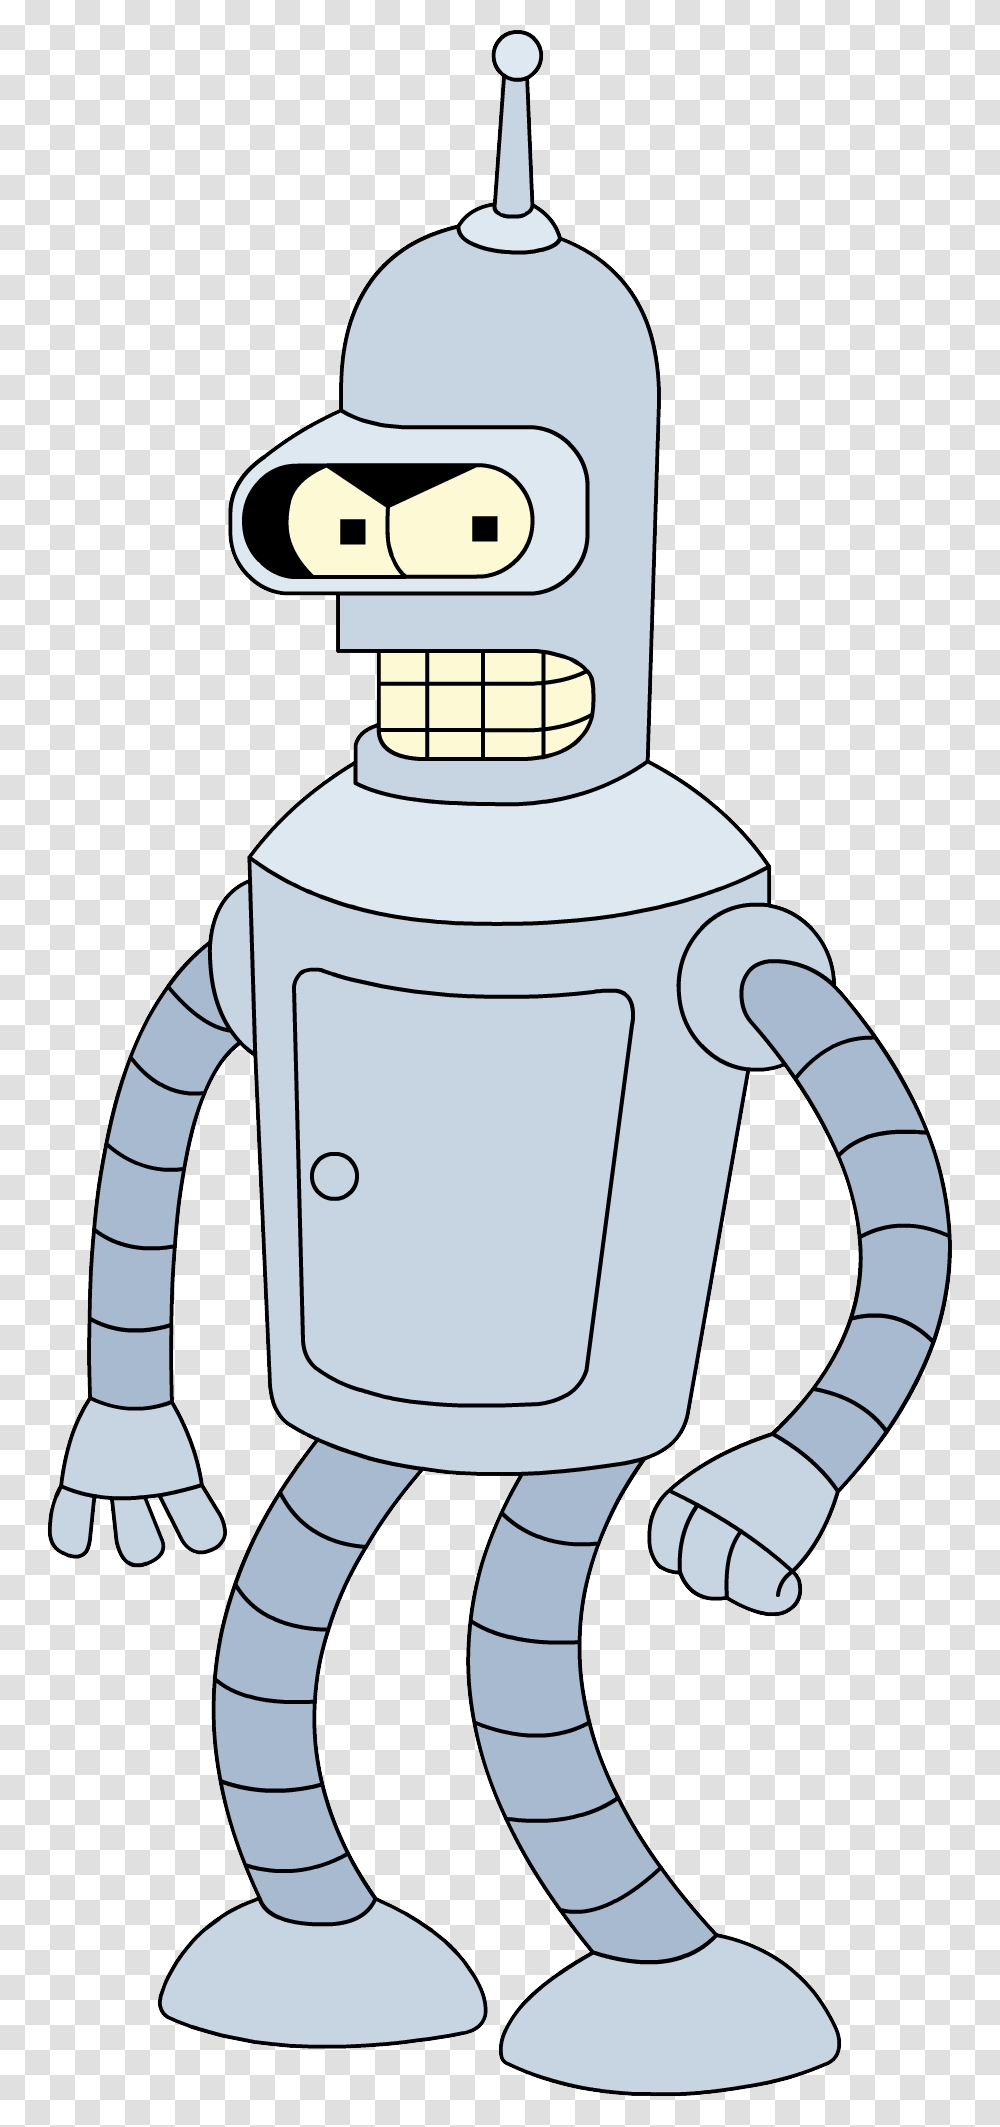 Futurama Images Free Download Bender, Pottery, Appliance, Fire Hydrant, Machine Transparent Png